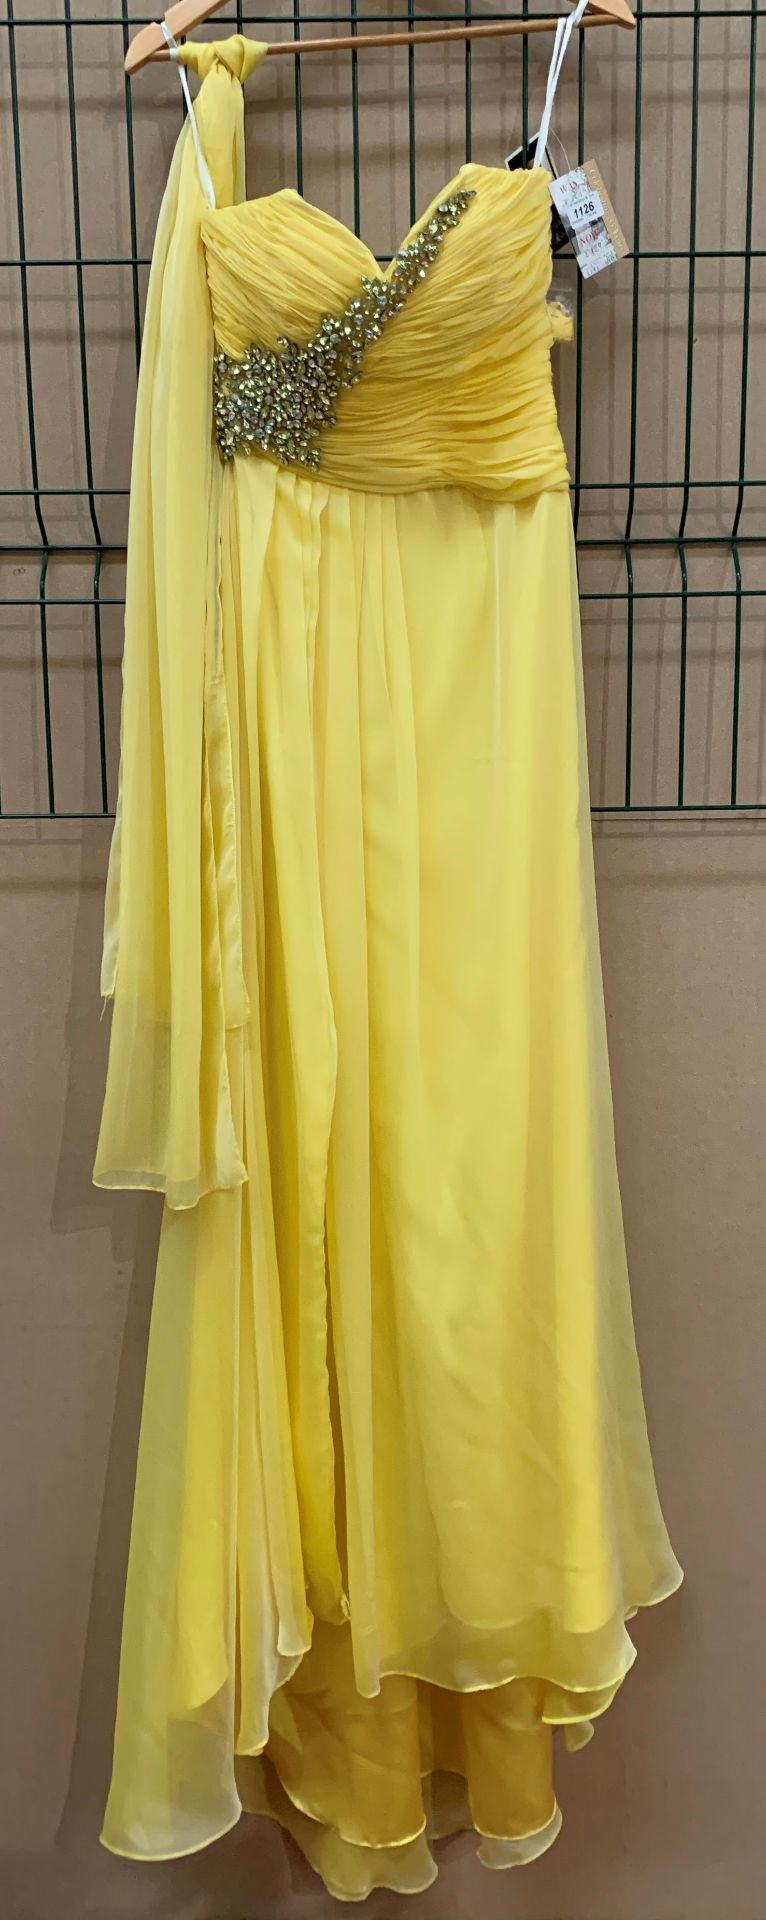 A bridesmaid/prom dress by Forever Yours, Katrina, yellow, size US 6,